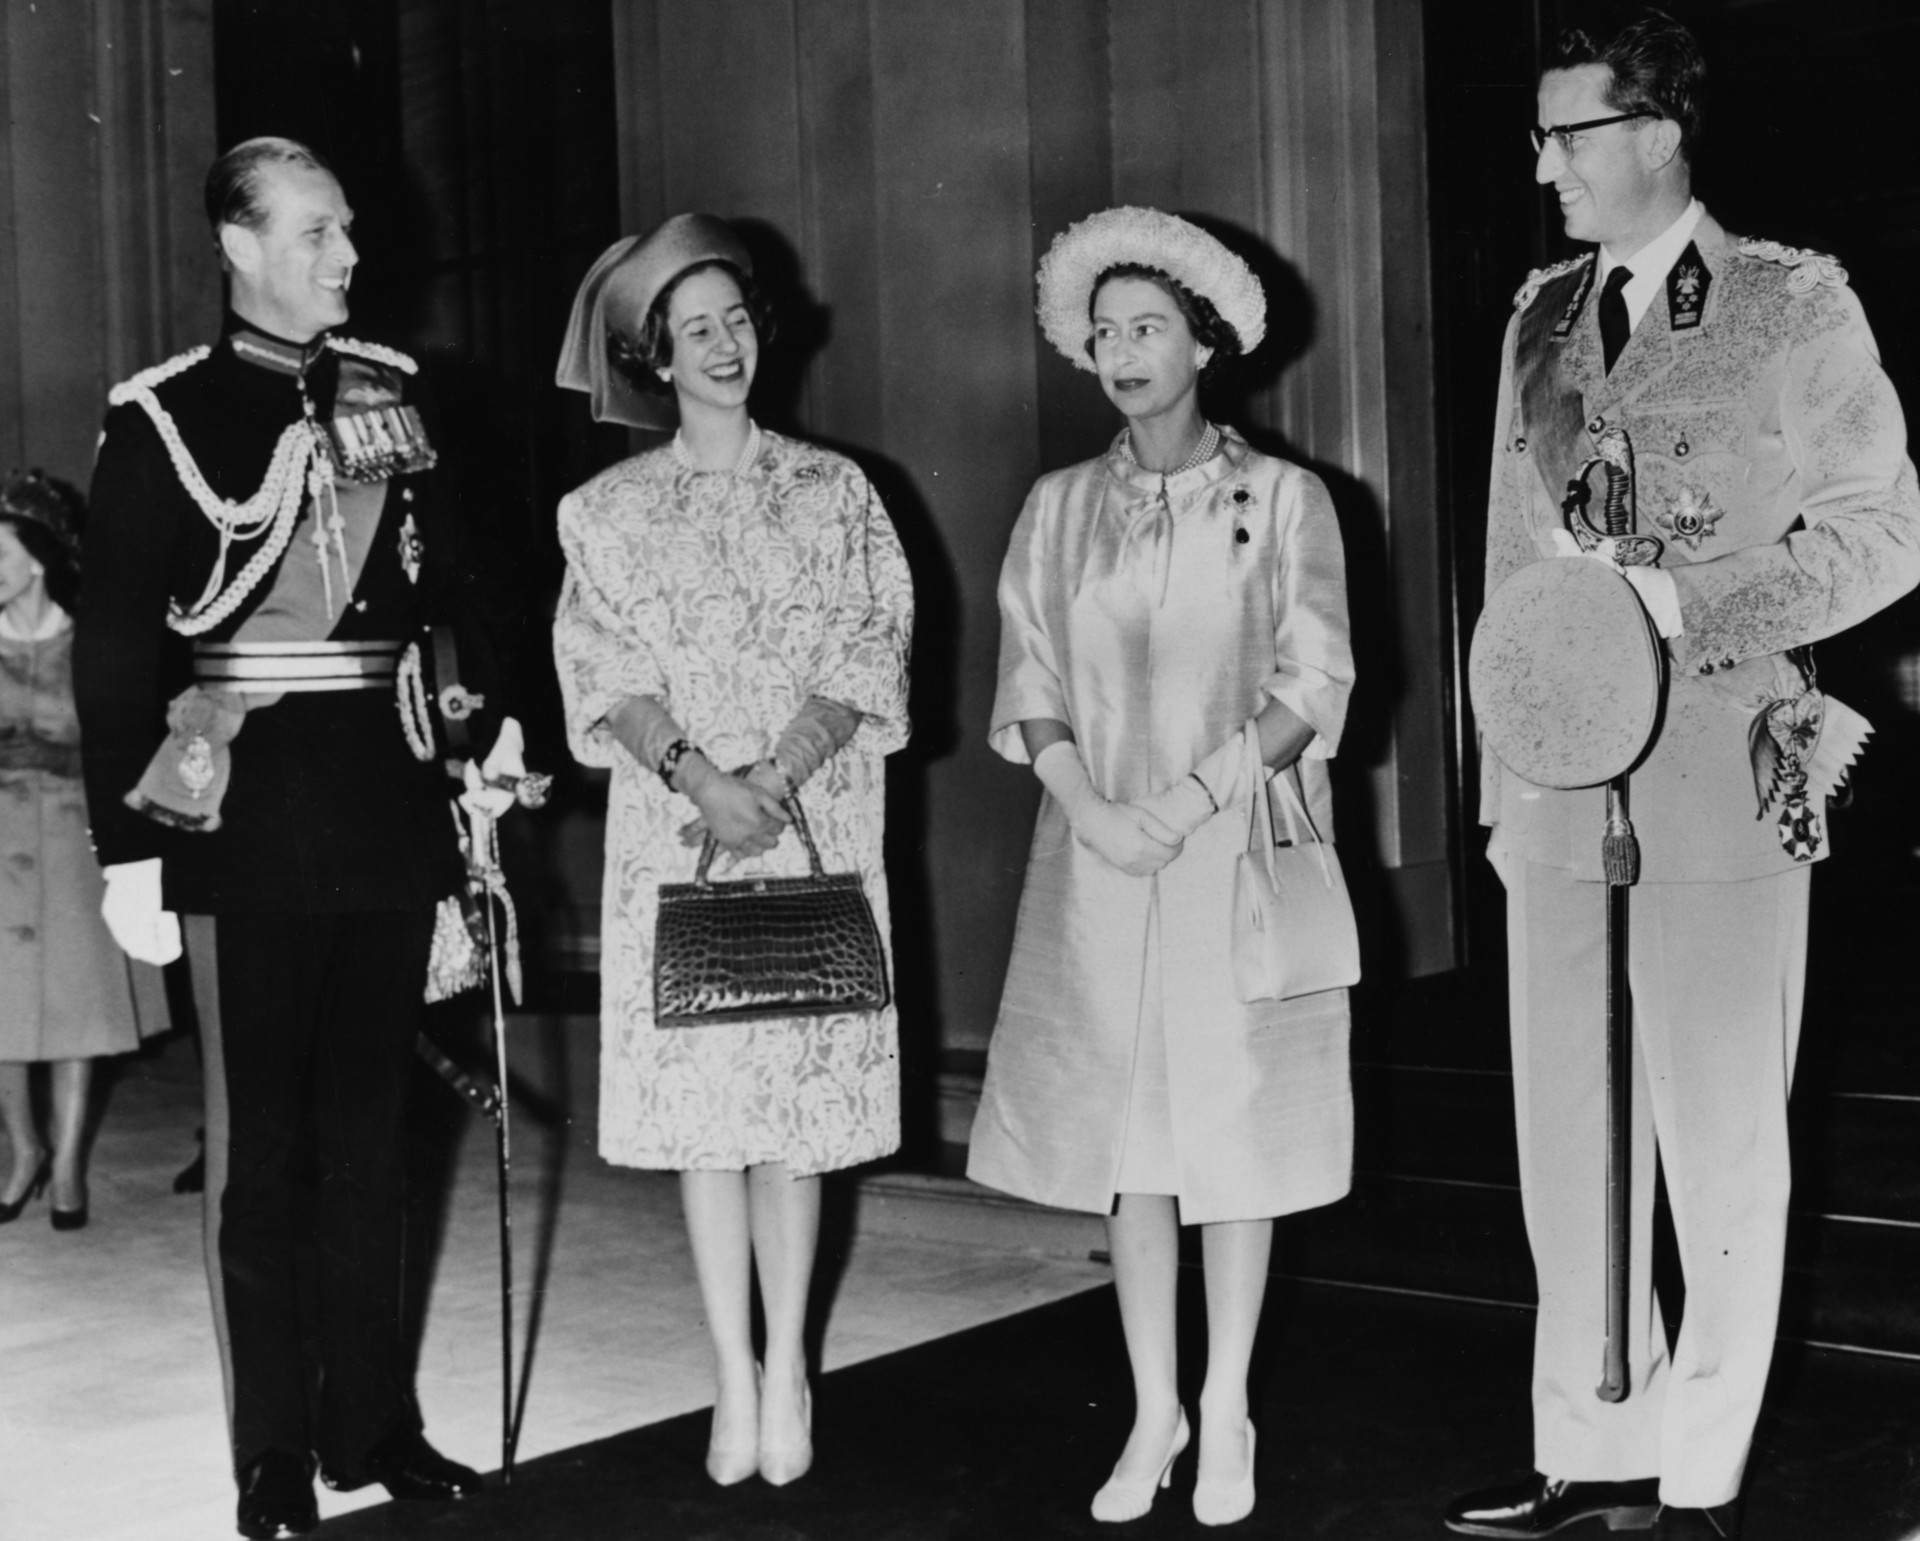 With Queen Fabiola and King Baudouin of Belgium.<p>You may also like:<a href="https://www.starsinsider.com/n/462494?utm_source=msn.com&utm_medium=display&utm_campaign=referral_description&utm_content=705778en-za"> Celebrities with quirky body parts</a></p>